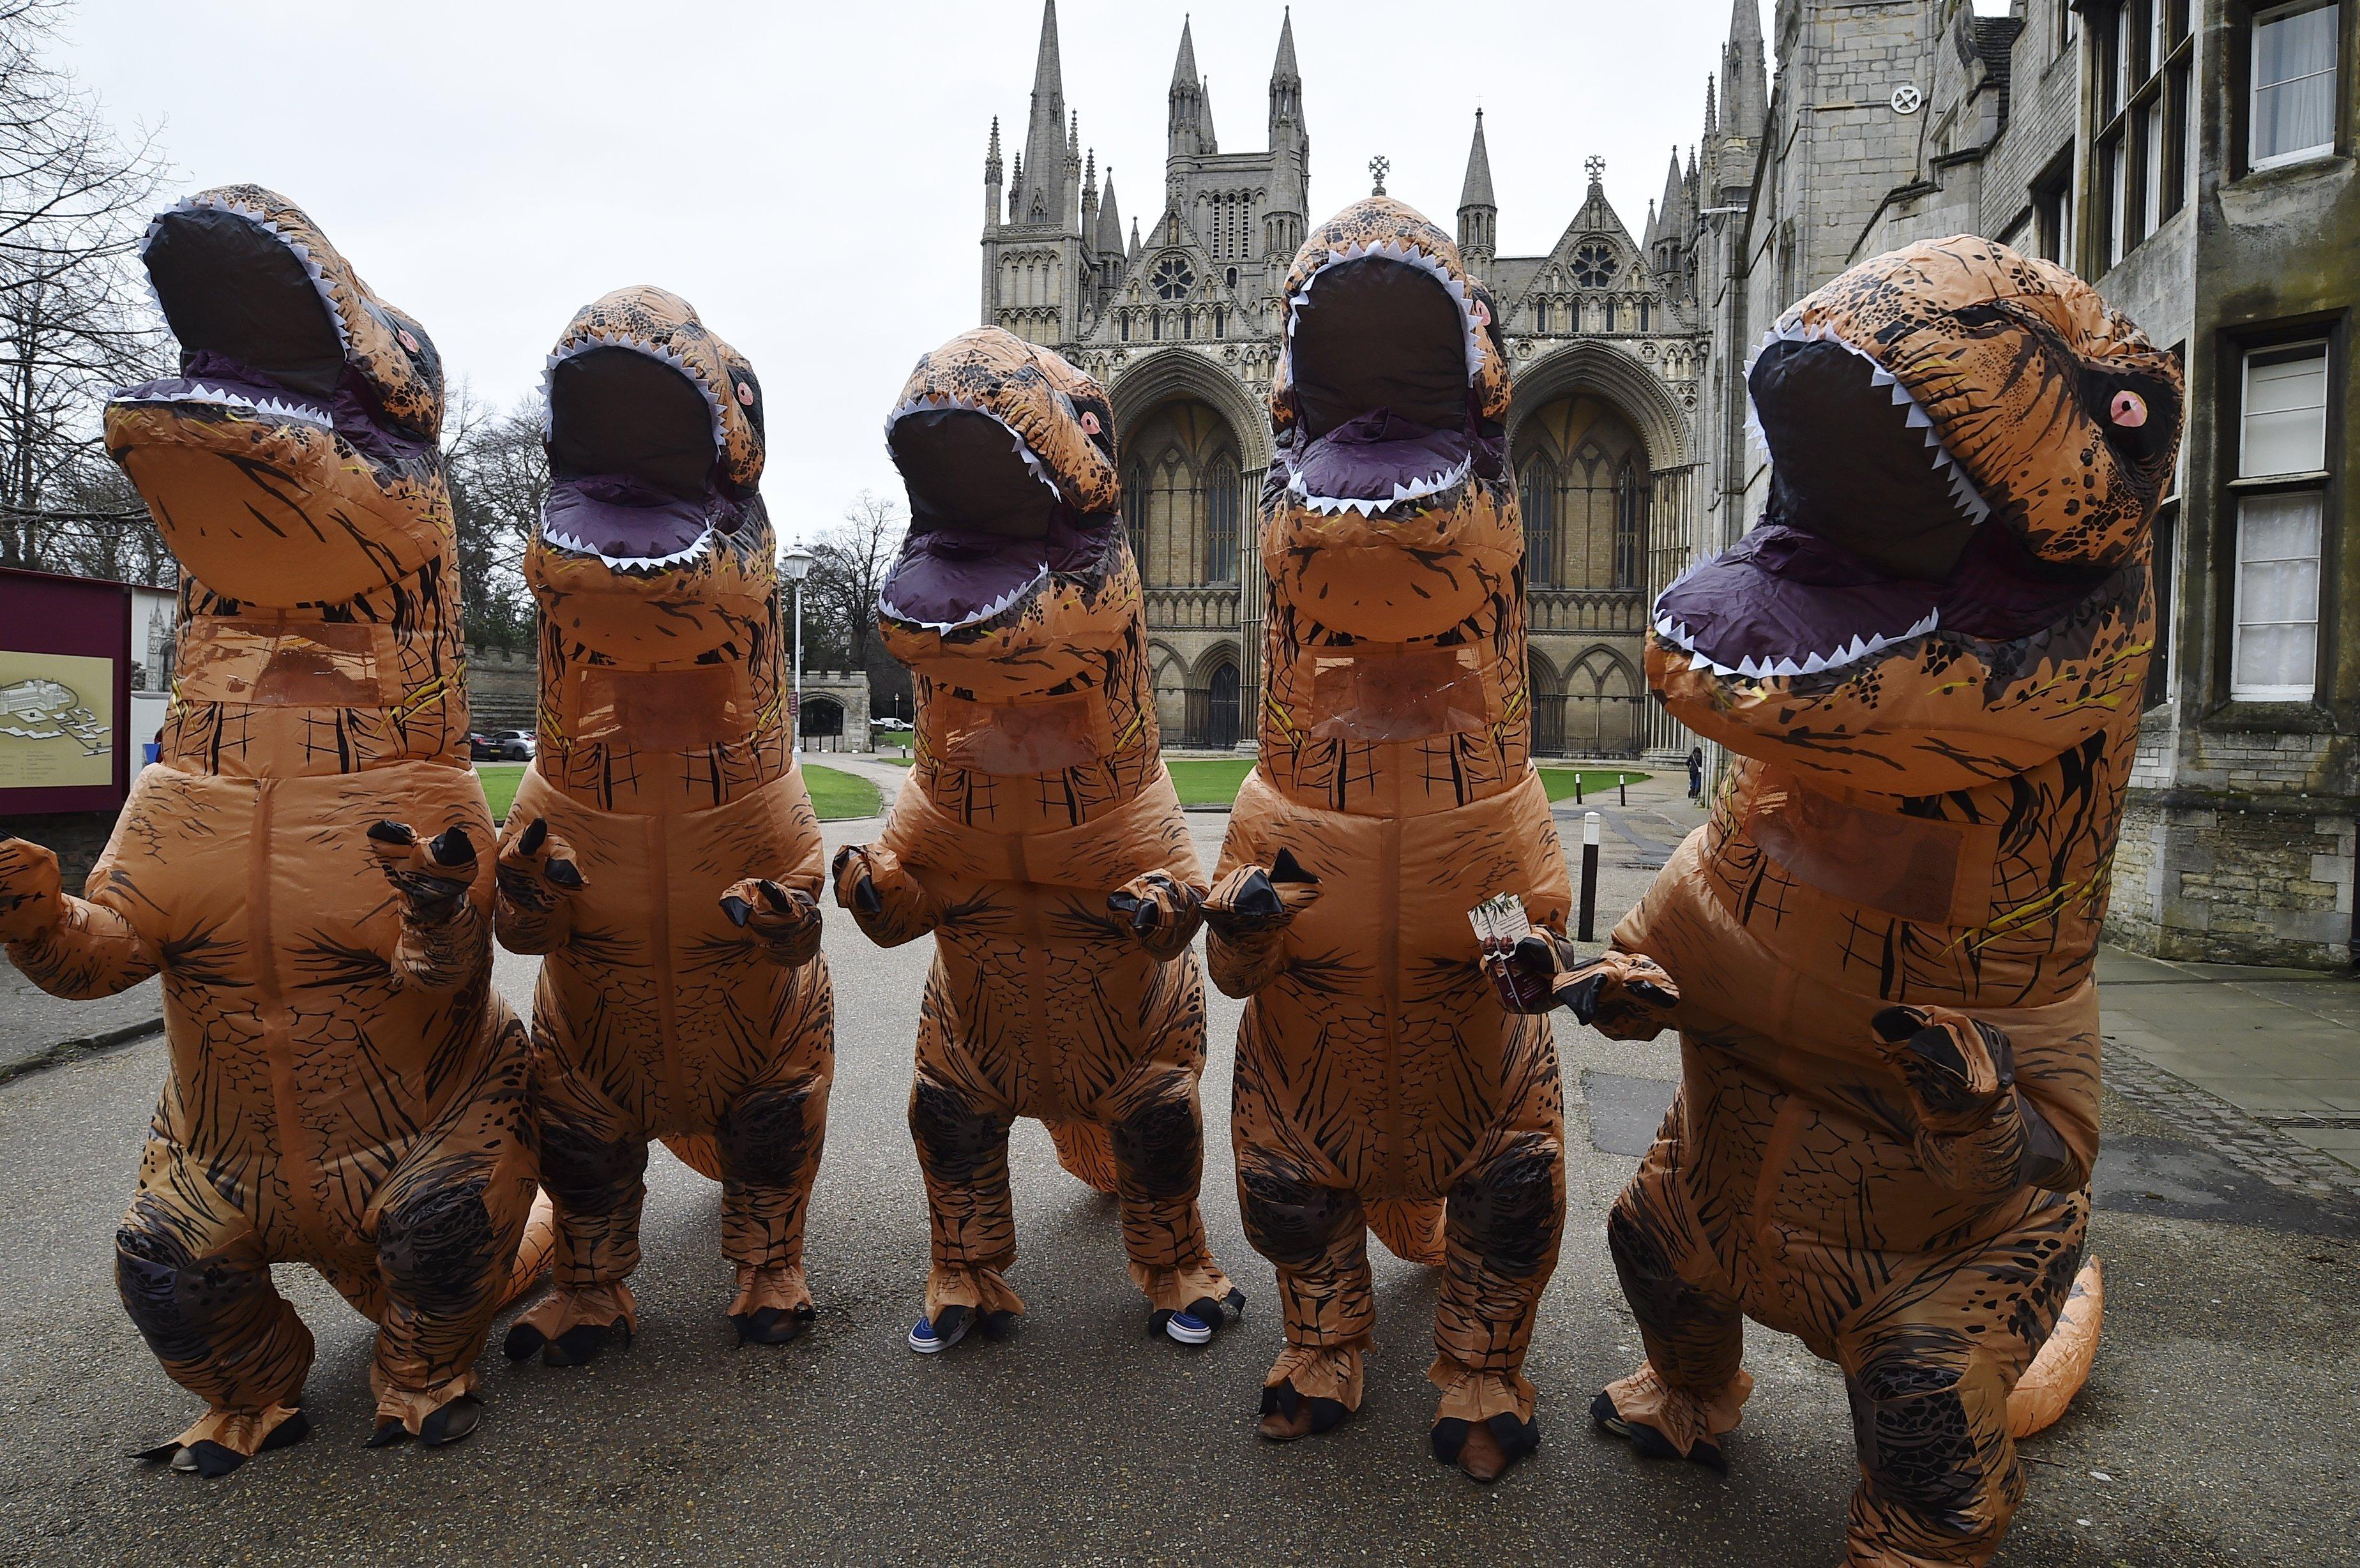 Dinosaurs visit Peterborough ahead of a major exhibition at the cathedral